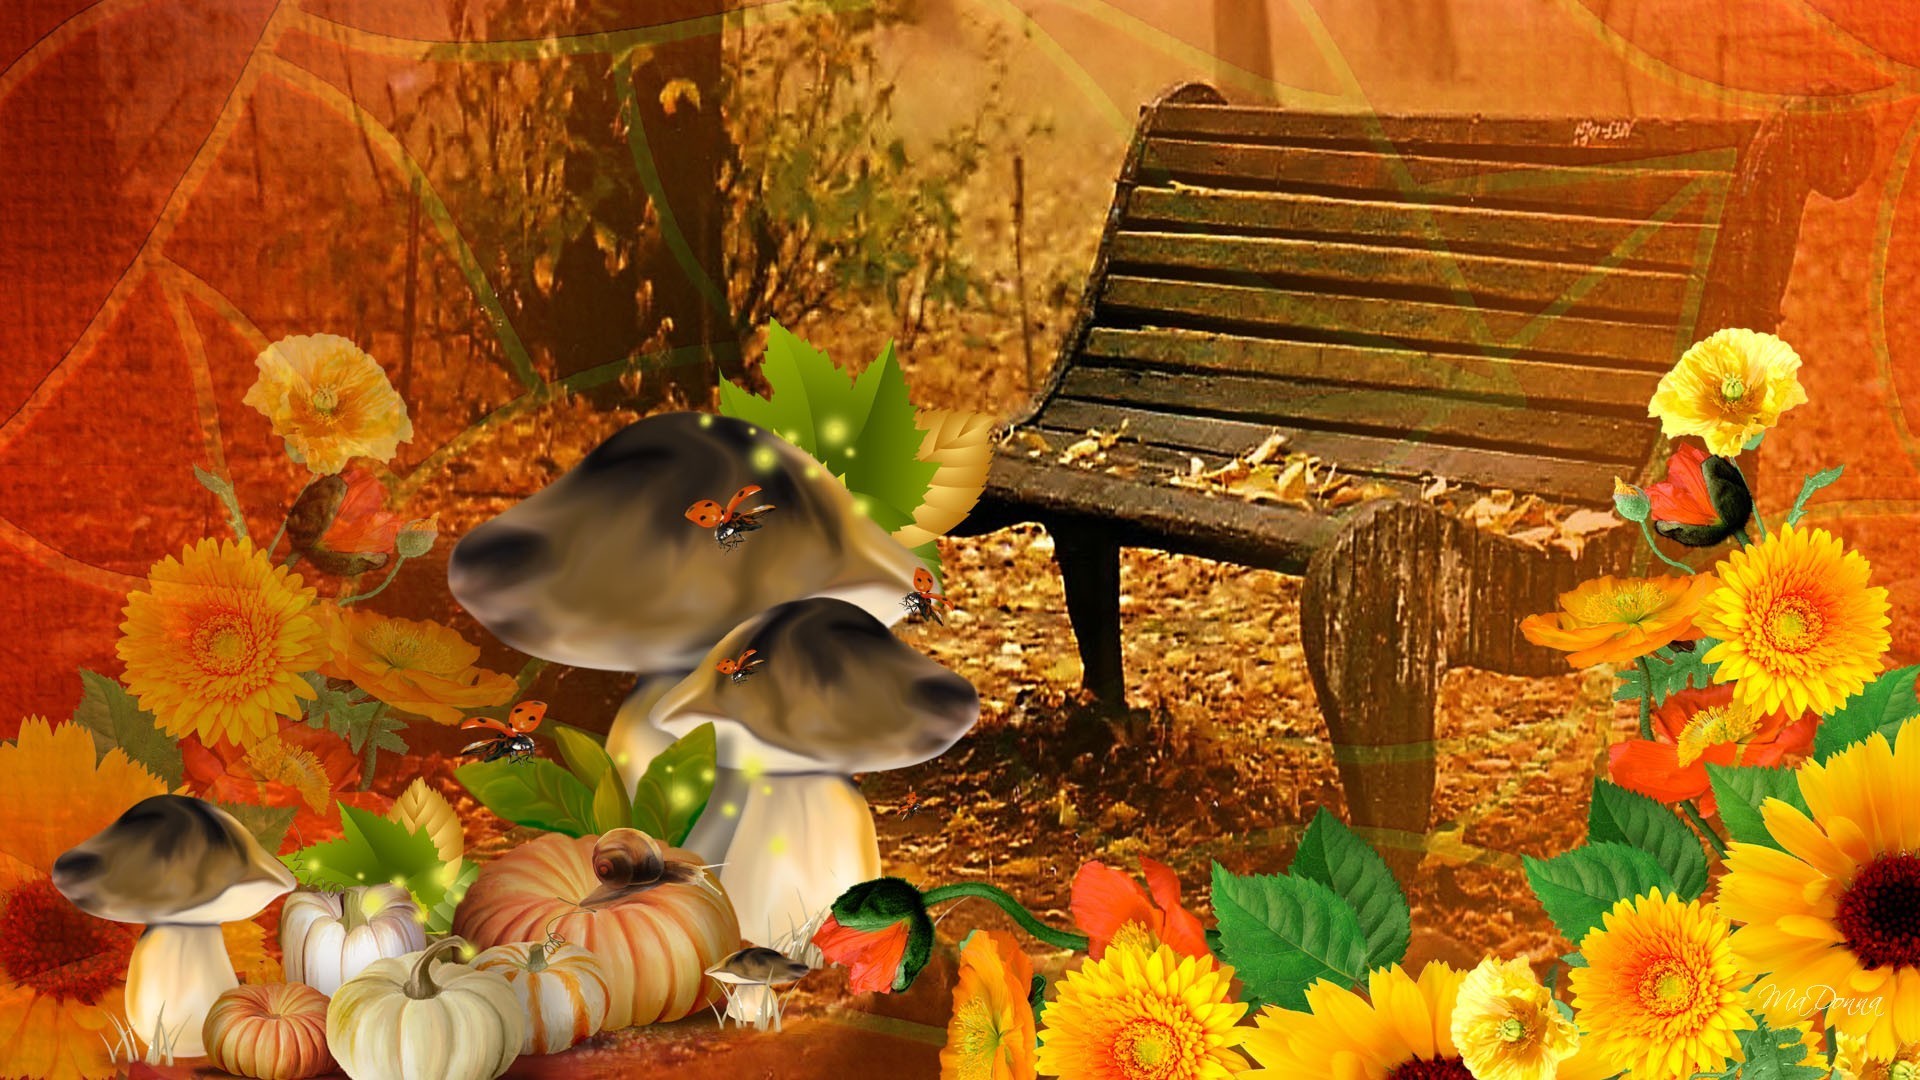 1920x1080 Gourds Tag - Bright Fall Day Autumn Flowers Harvest Ladybugs Mushrooms  Gourds Fleurs Pumpkin October Thanksgiving